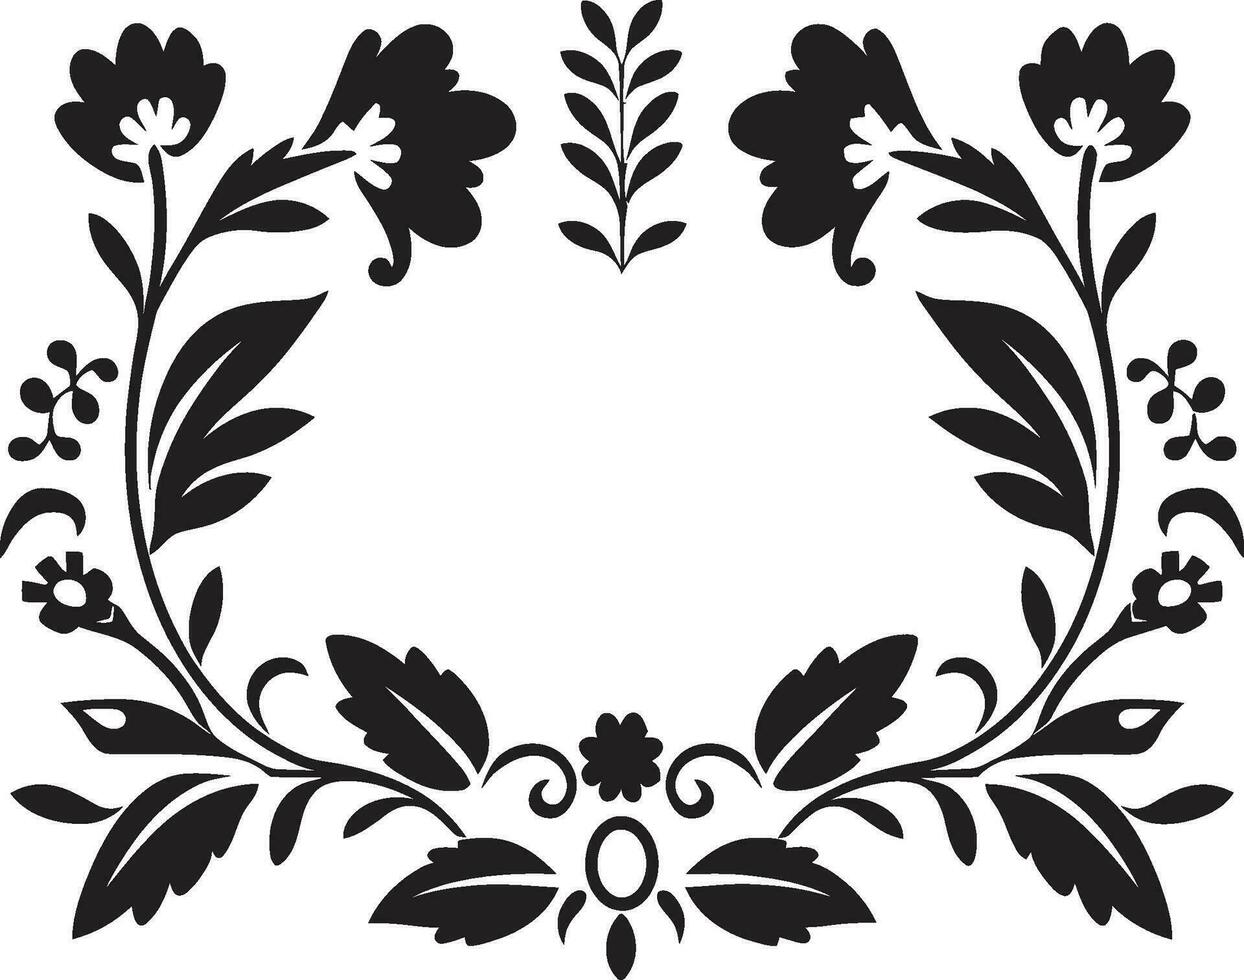 Floral Mosaic Vector Logo with Black Tiles Structured Blooms Geometric Floral Design